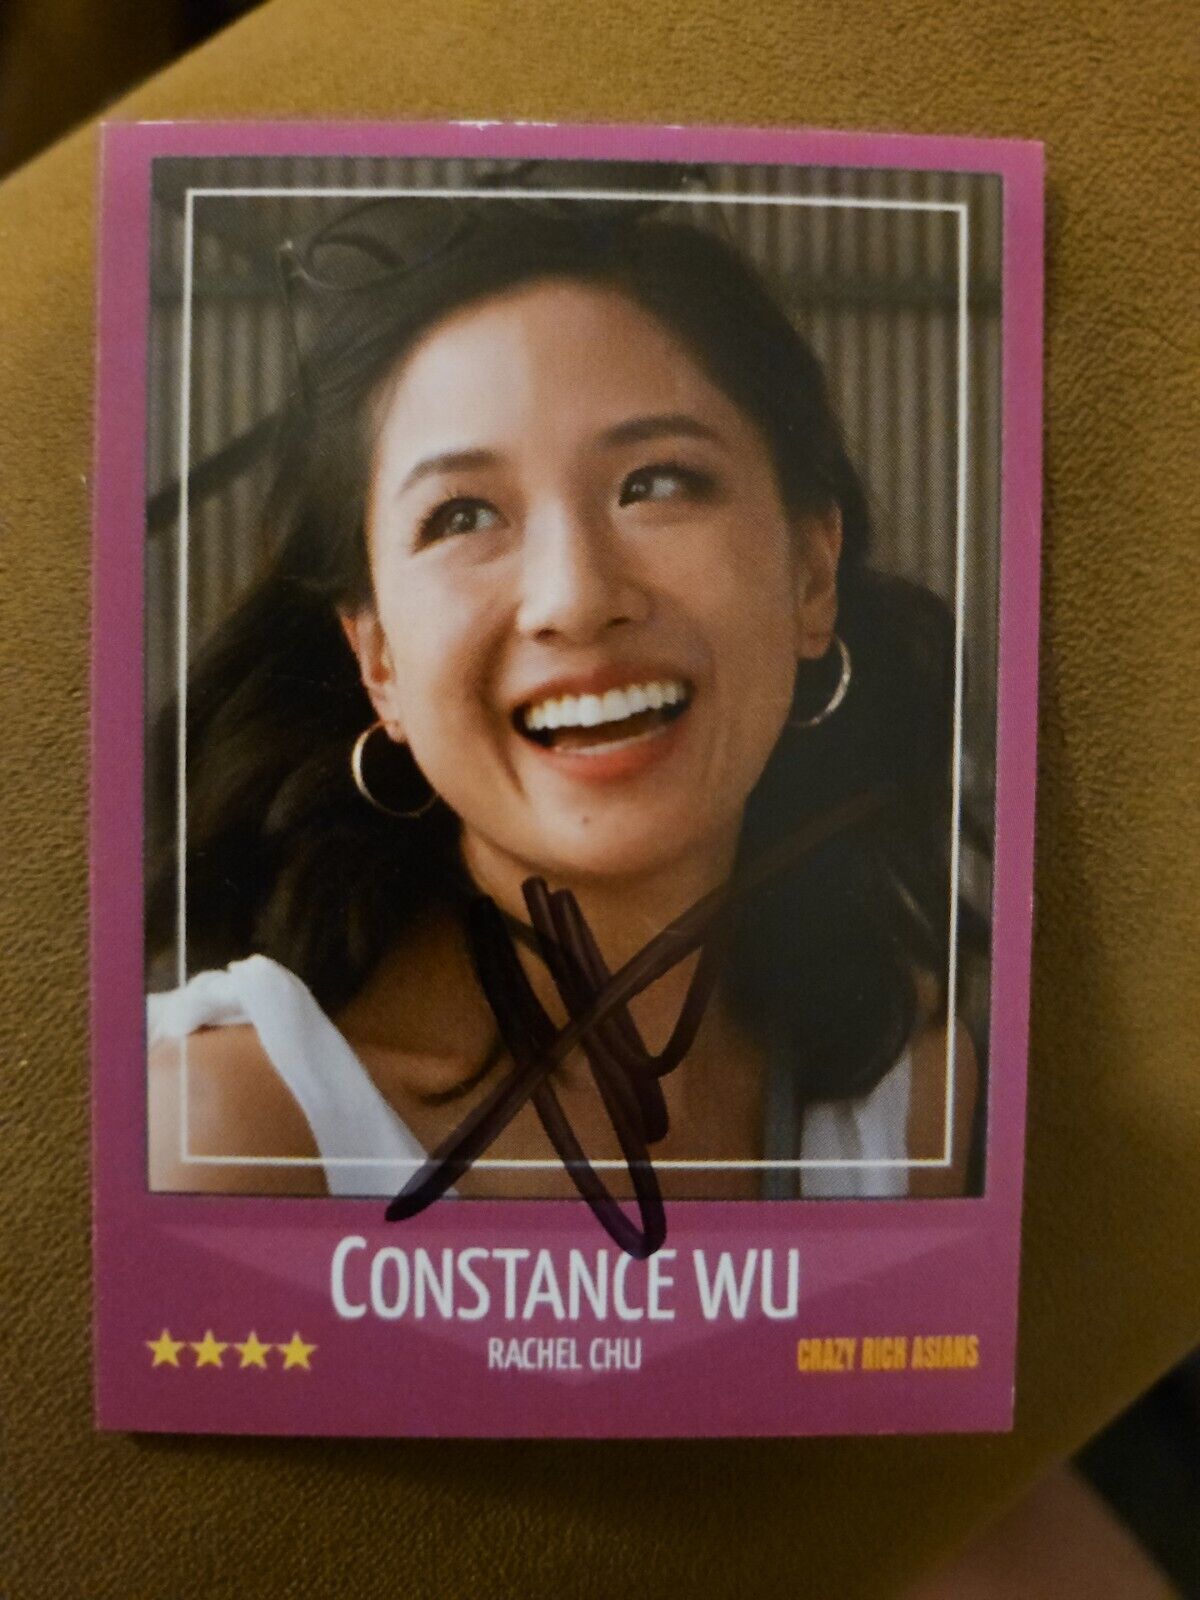 Constance Wu Custom Signed Card - Played Rachel Chu From Cazy Rich Asians